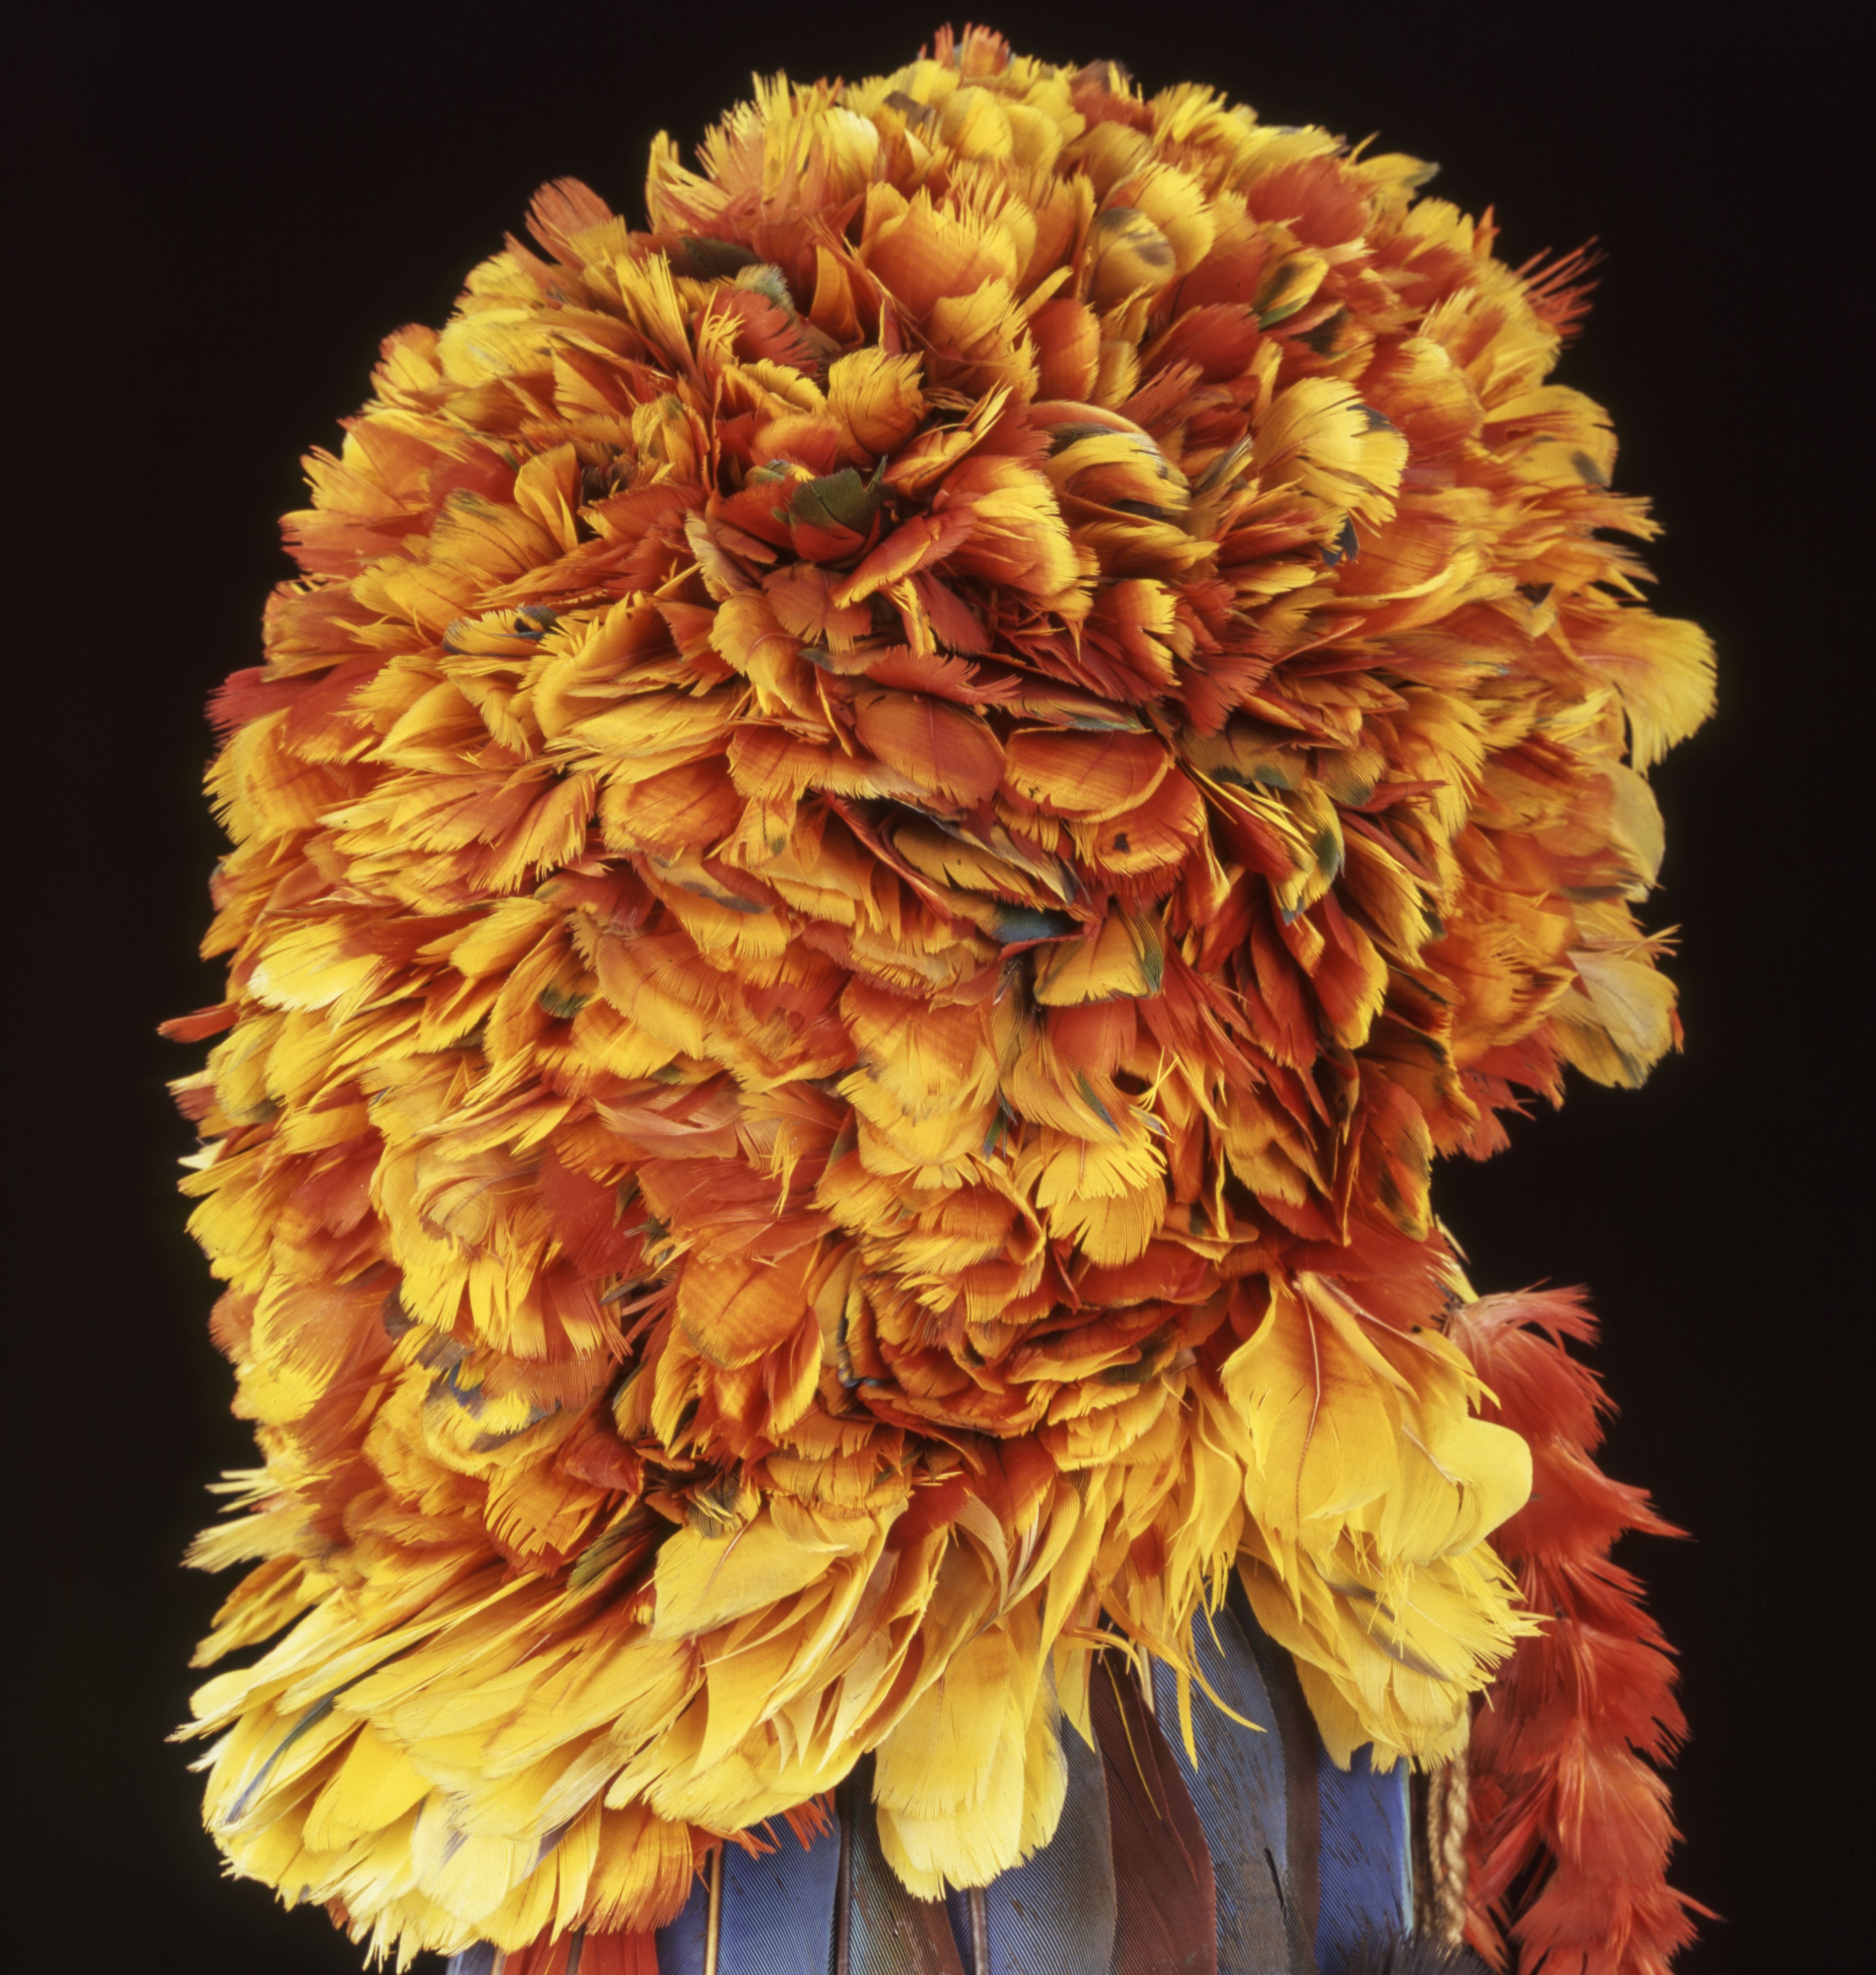 Close up image of a feathered headdress, with vibrant yellow, orange and red feathers visible. Some blue feathers poke through, but very subtly.